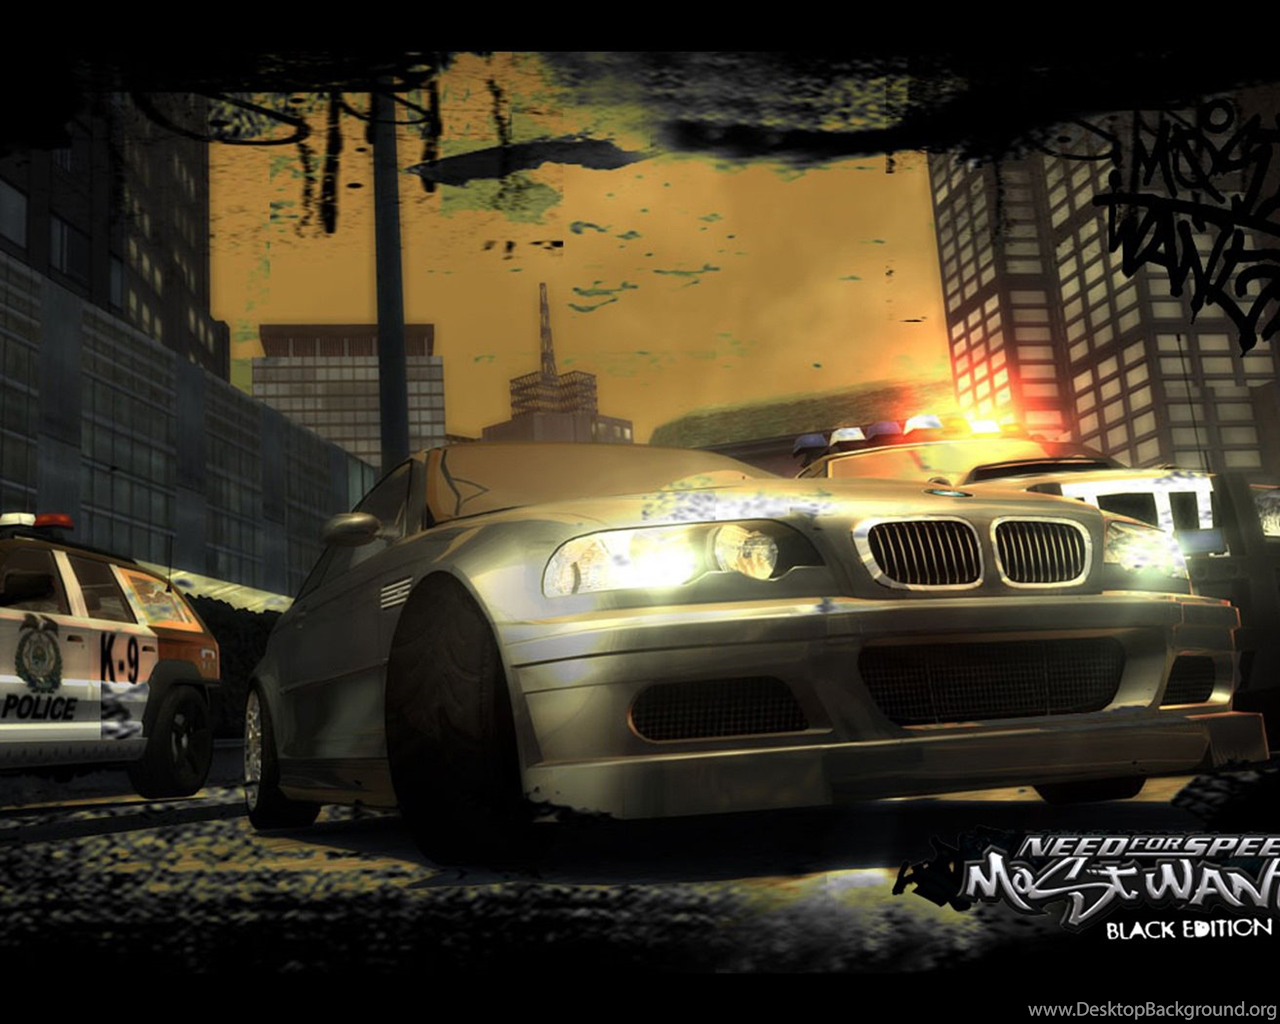 Песни из игры need for speed. NFS most wanted 2005 мост. NFS most wanted 2005 БМВ. Нфс МВ 2005. NFS MW 2005 BMW.